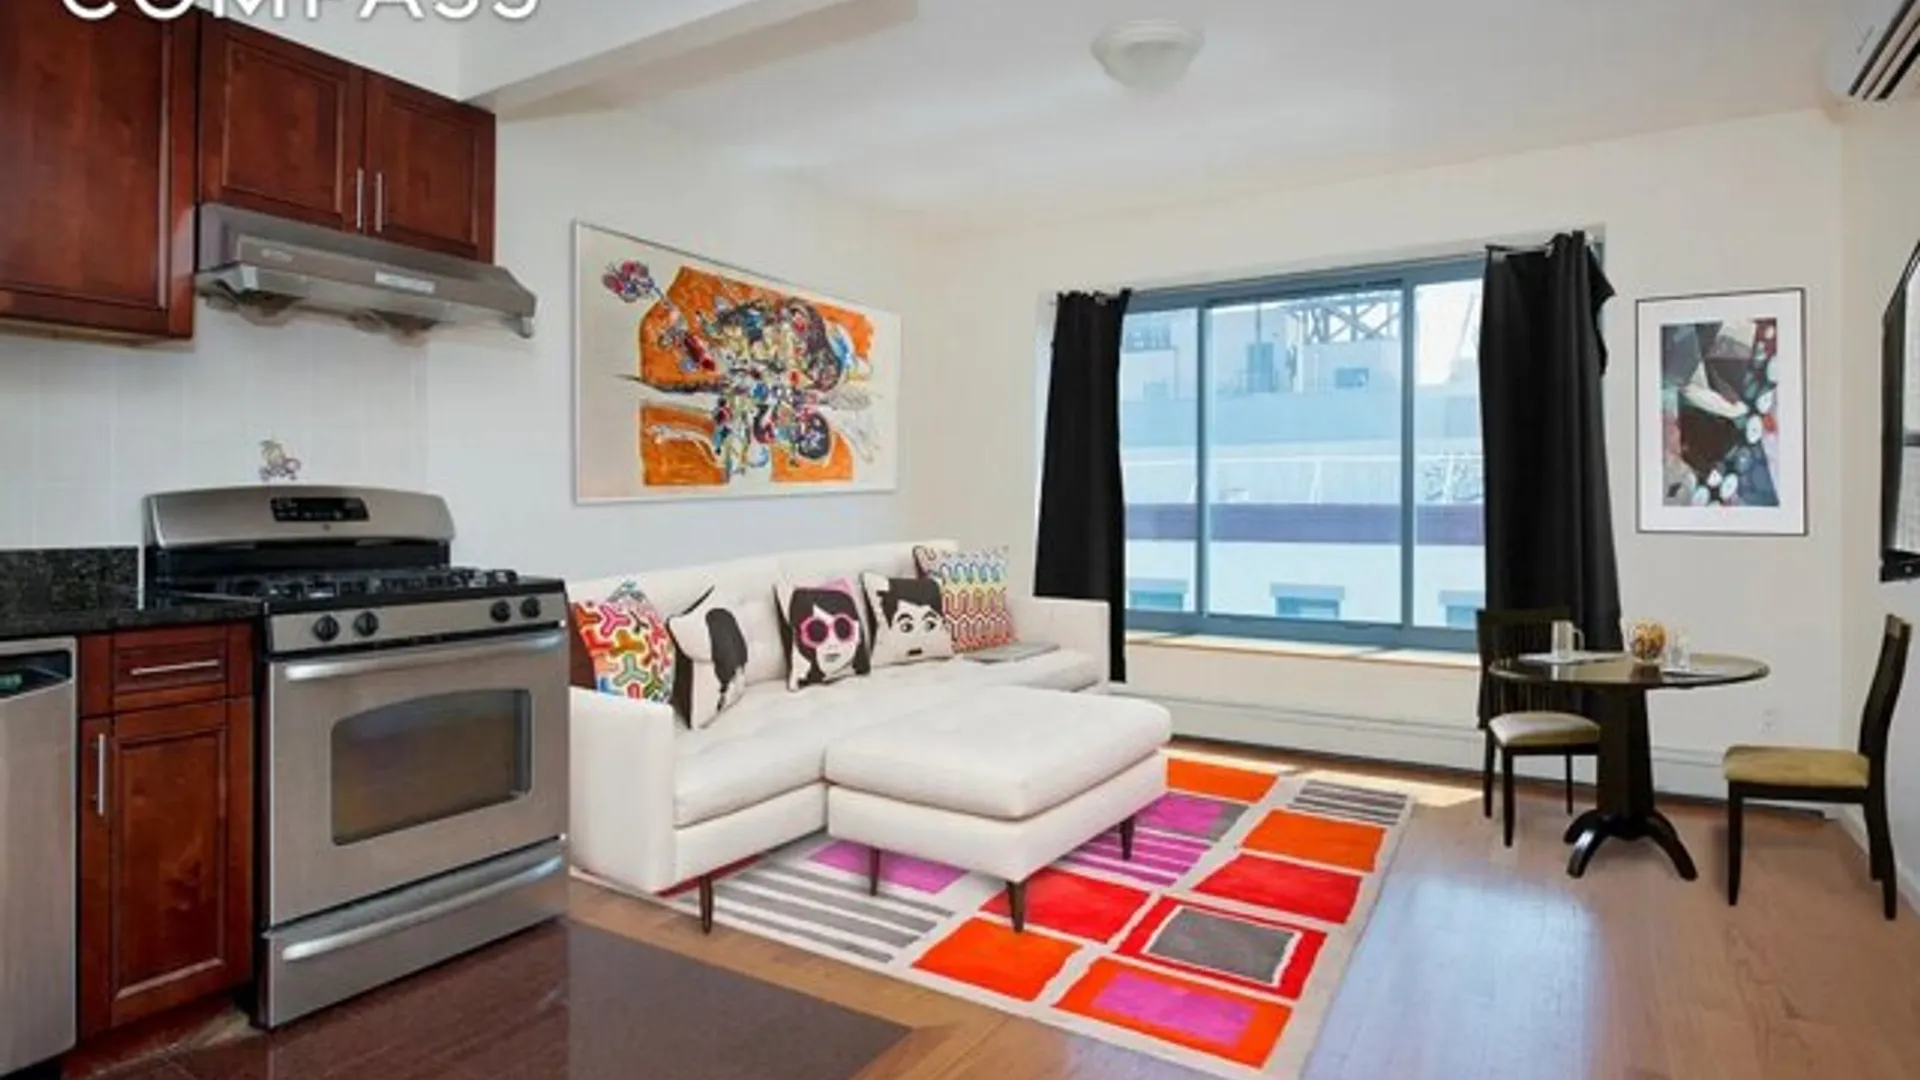 155 Hester Street, New York, NY 10013, USA | 1 bed house for rent